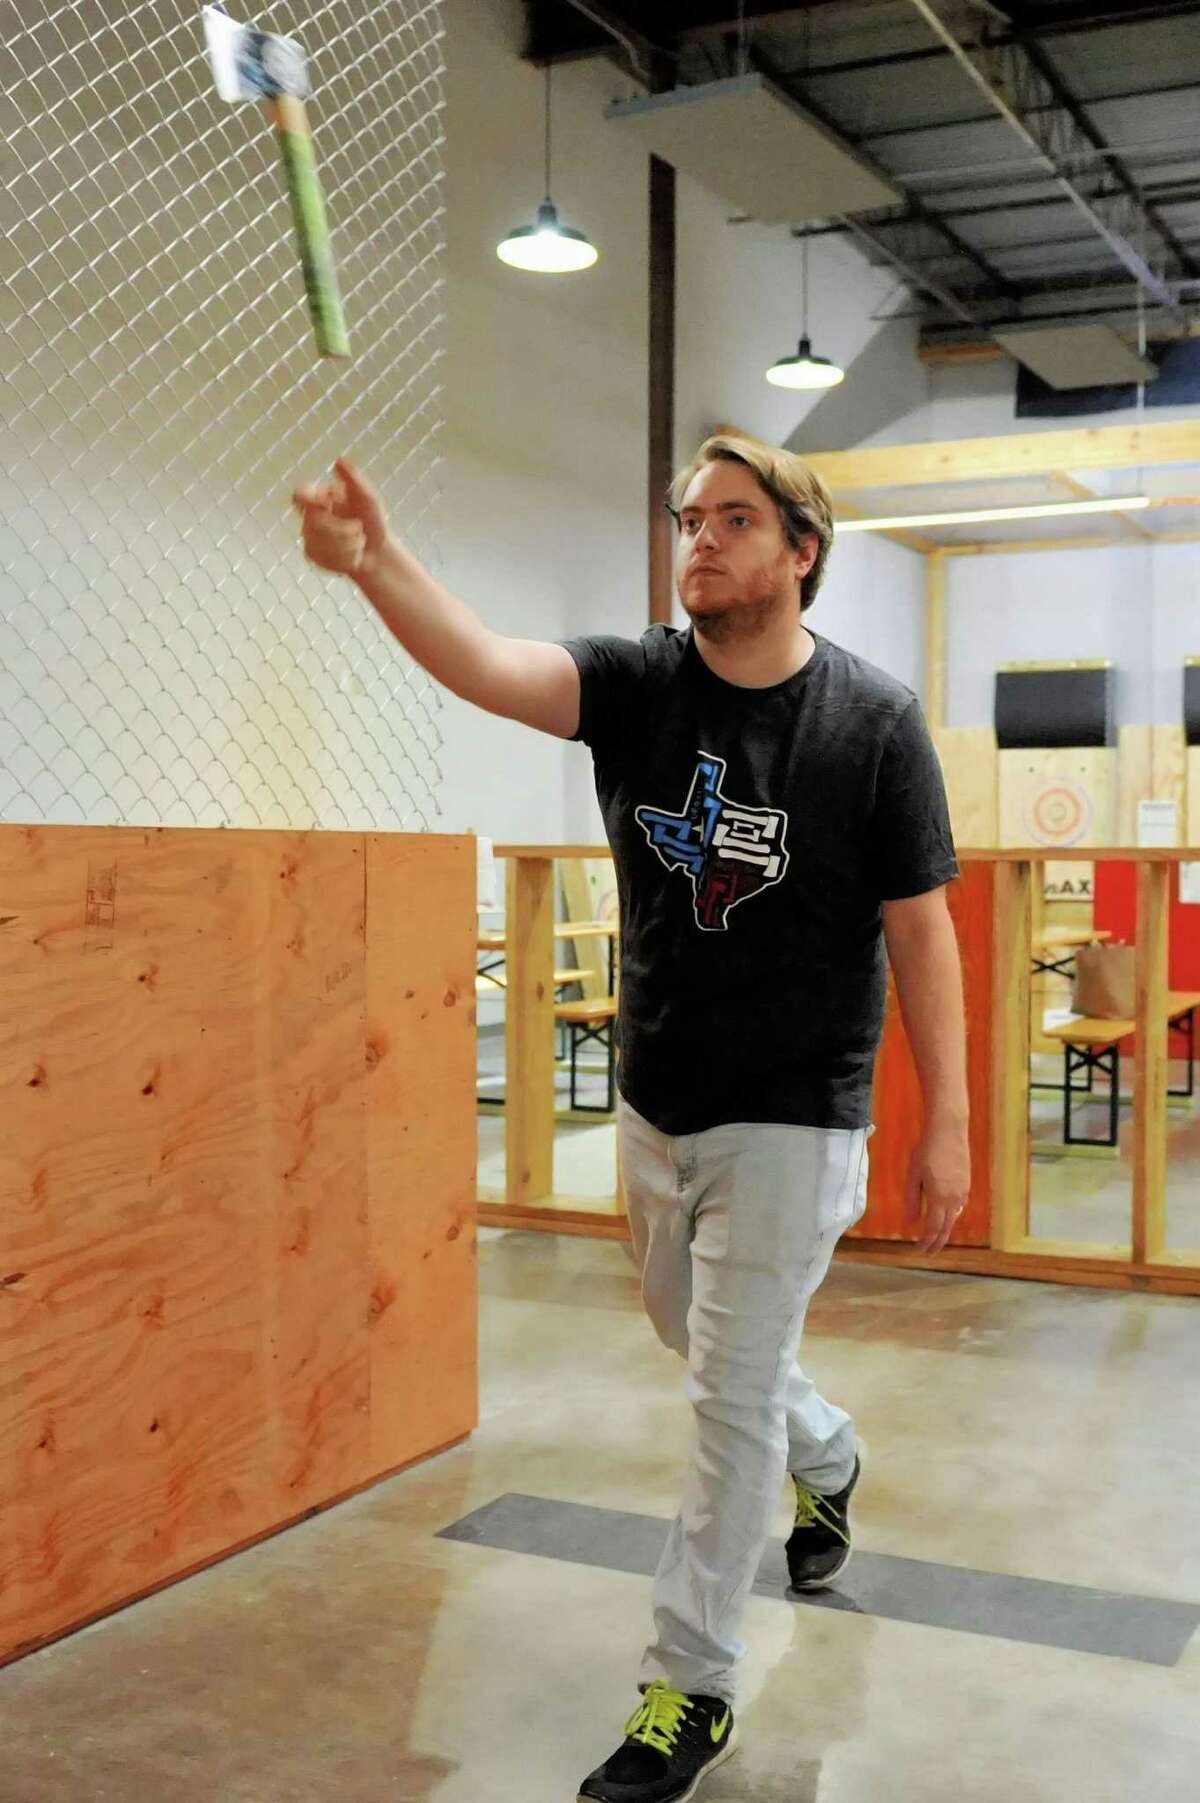 Kyle Hough tosses an axe at a target at Urban Axes, Houston, TX on Saturday, January 4, 2020.